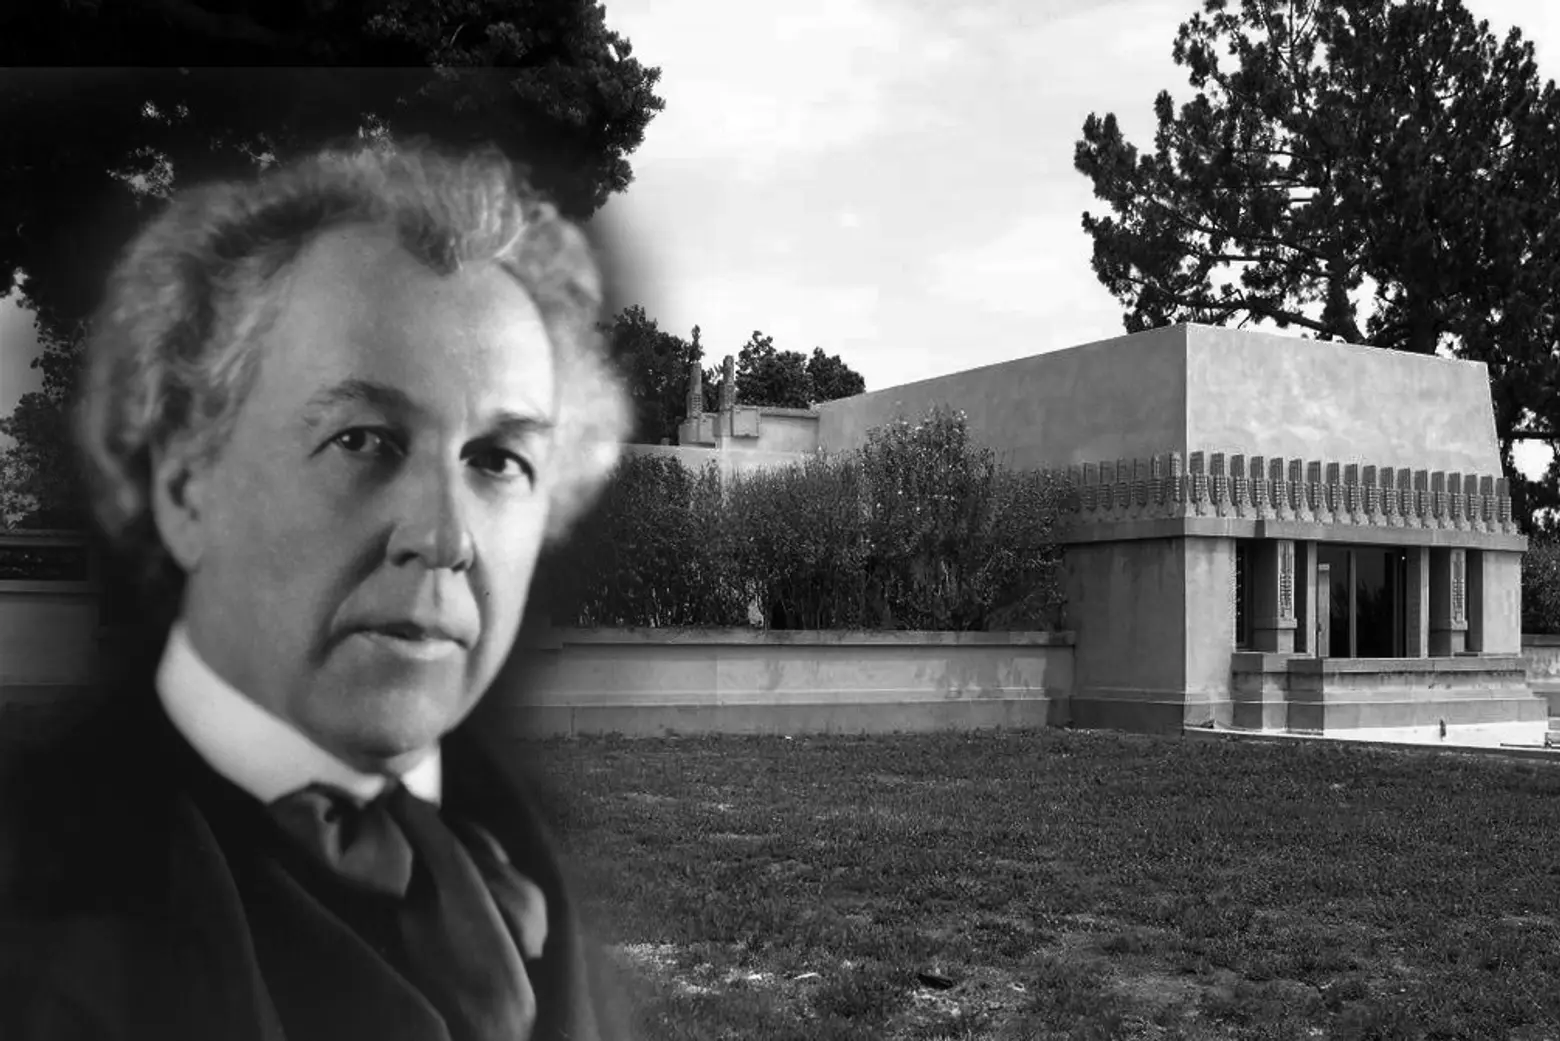 10 things you never knew about Frank Lloyd Wright